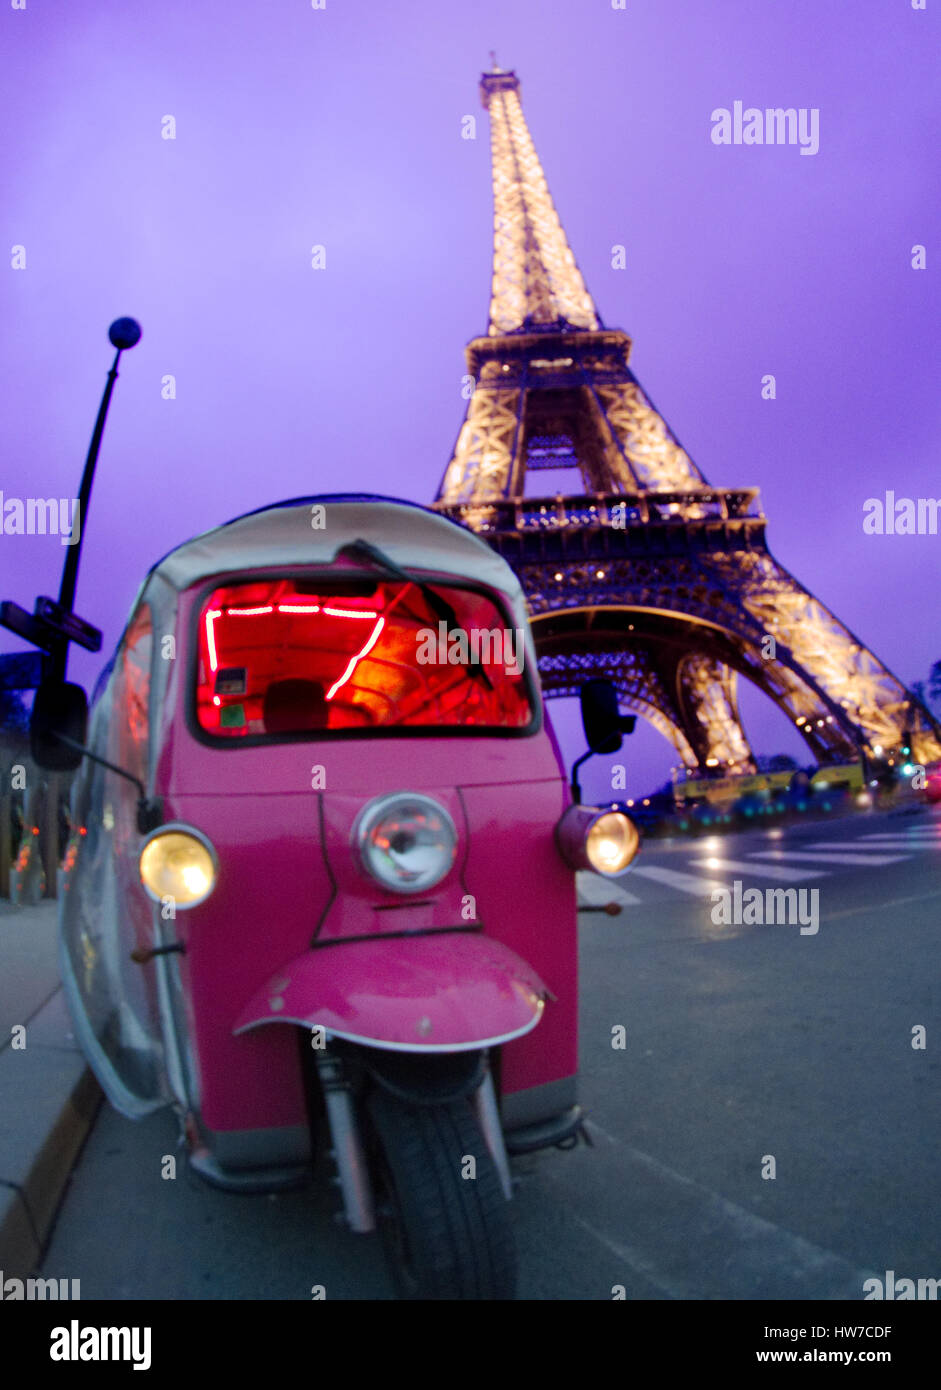 End afternoon: Beautiful pink car in front of Eiffel Tower Stock Photo